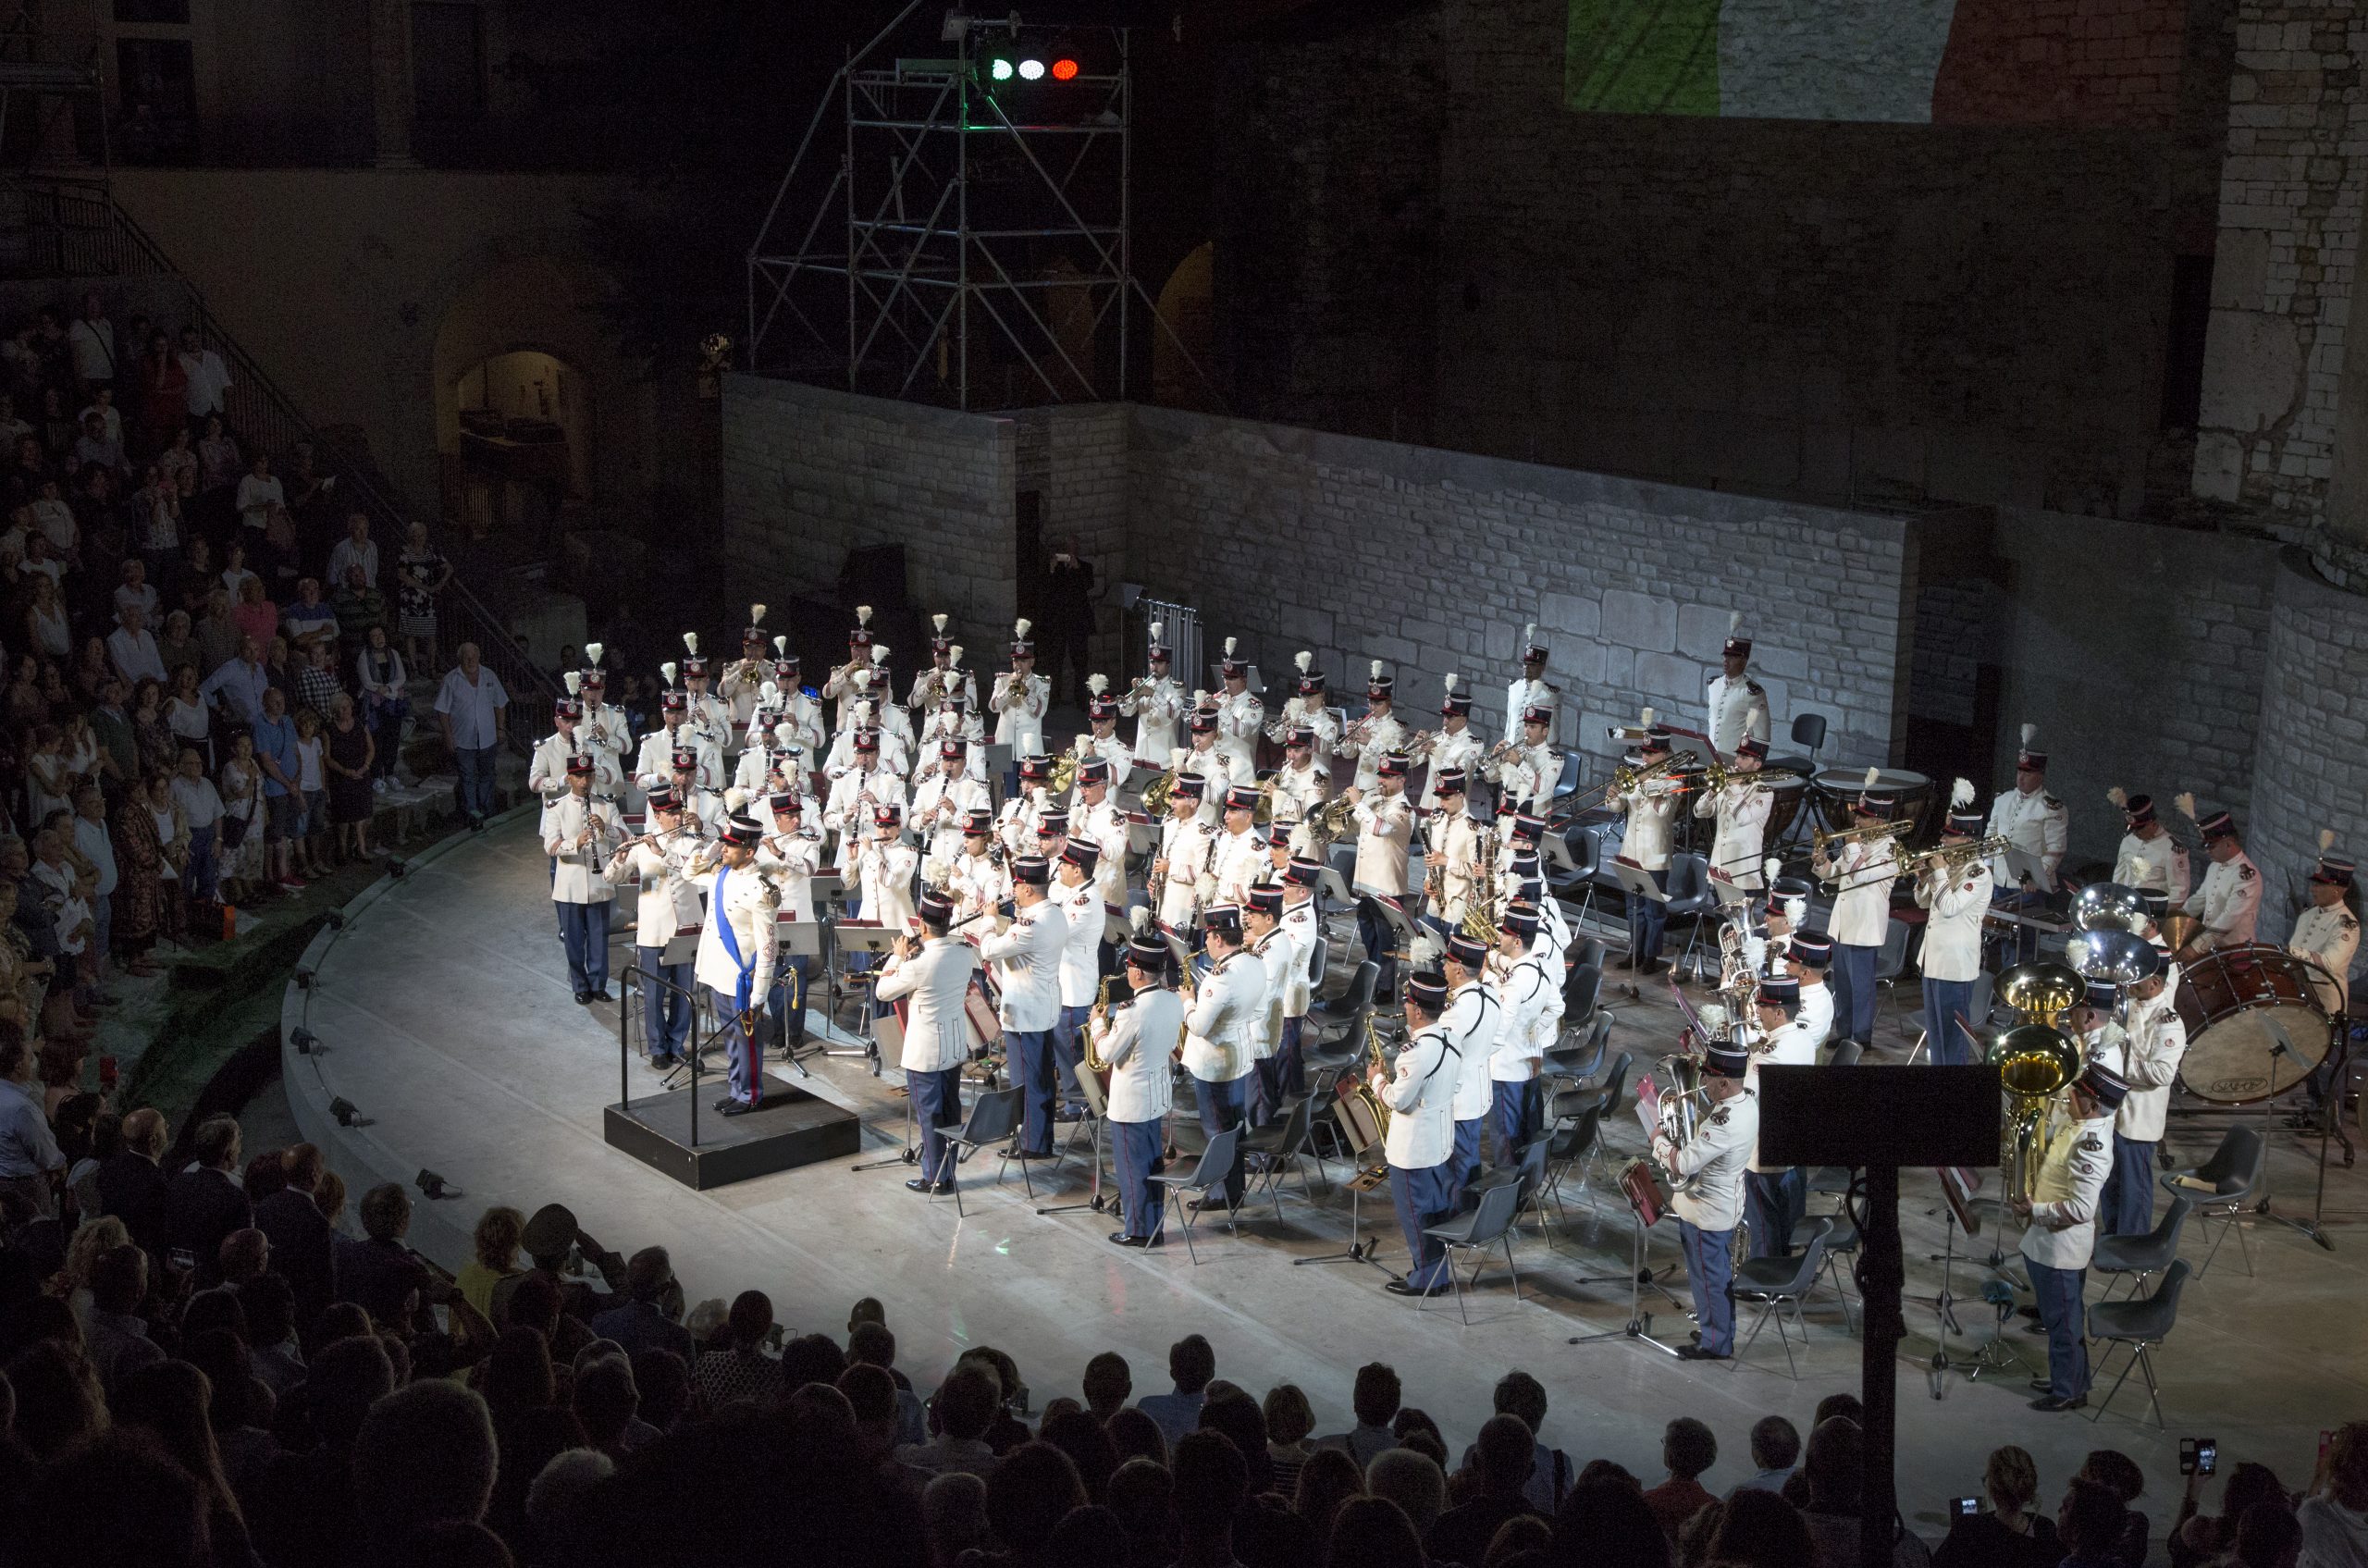 CONCERT OF THE MUSIC BAND OF THE ITALIAN ARMY